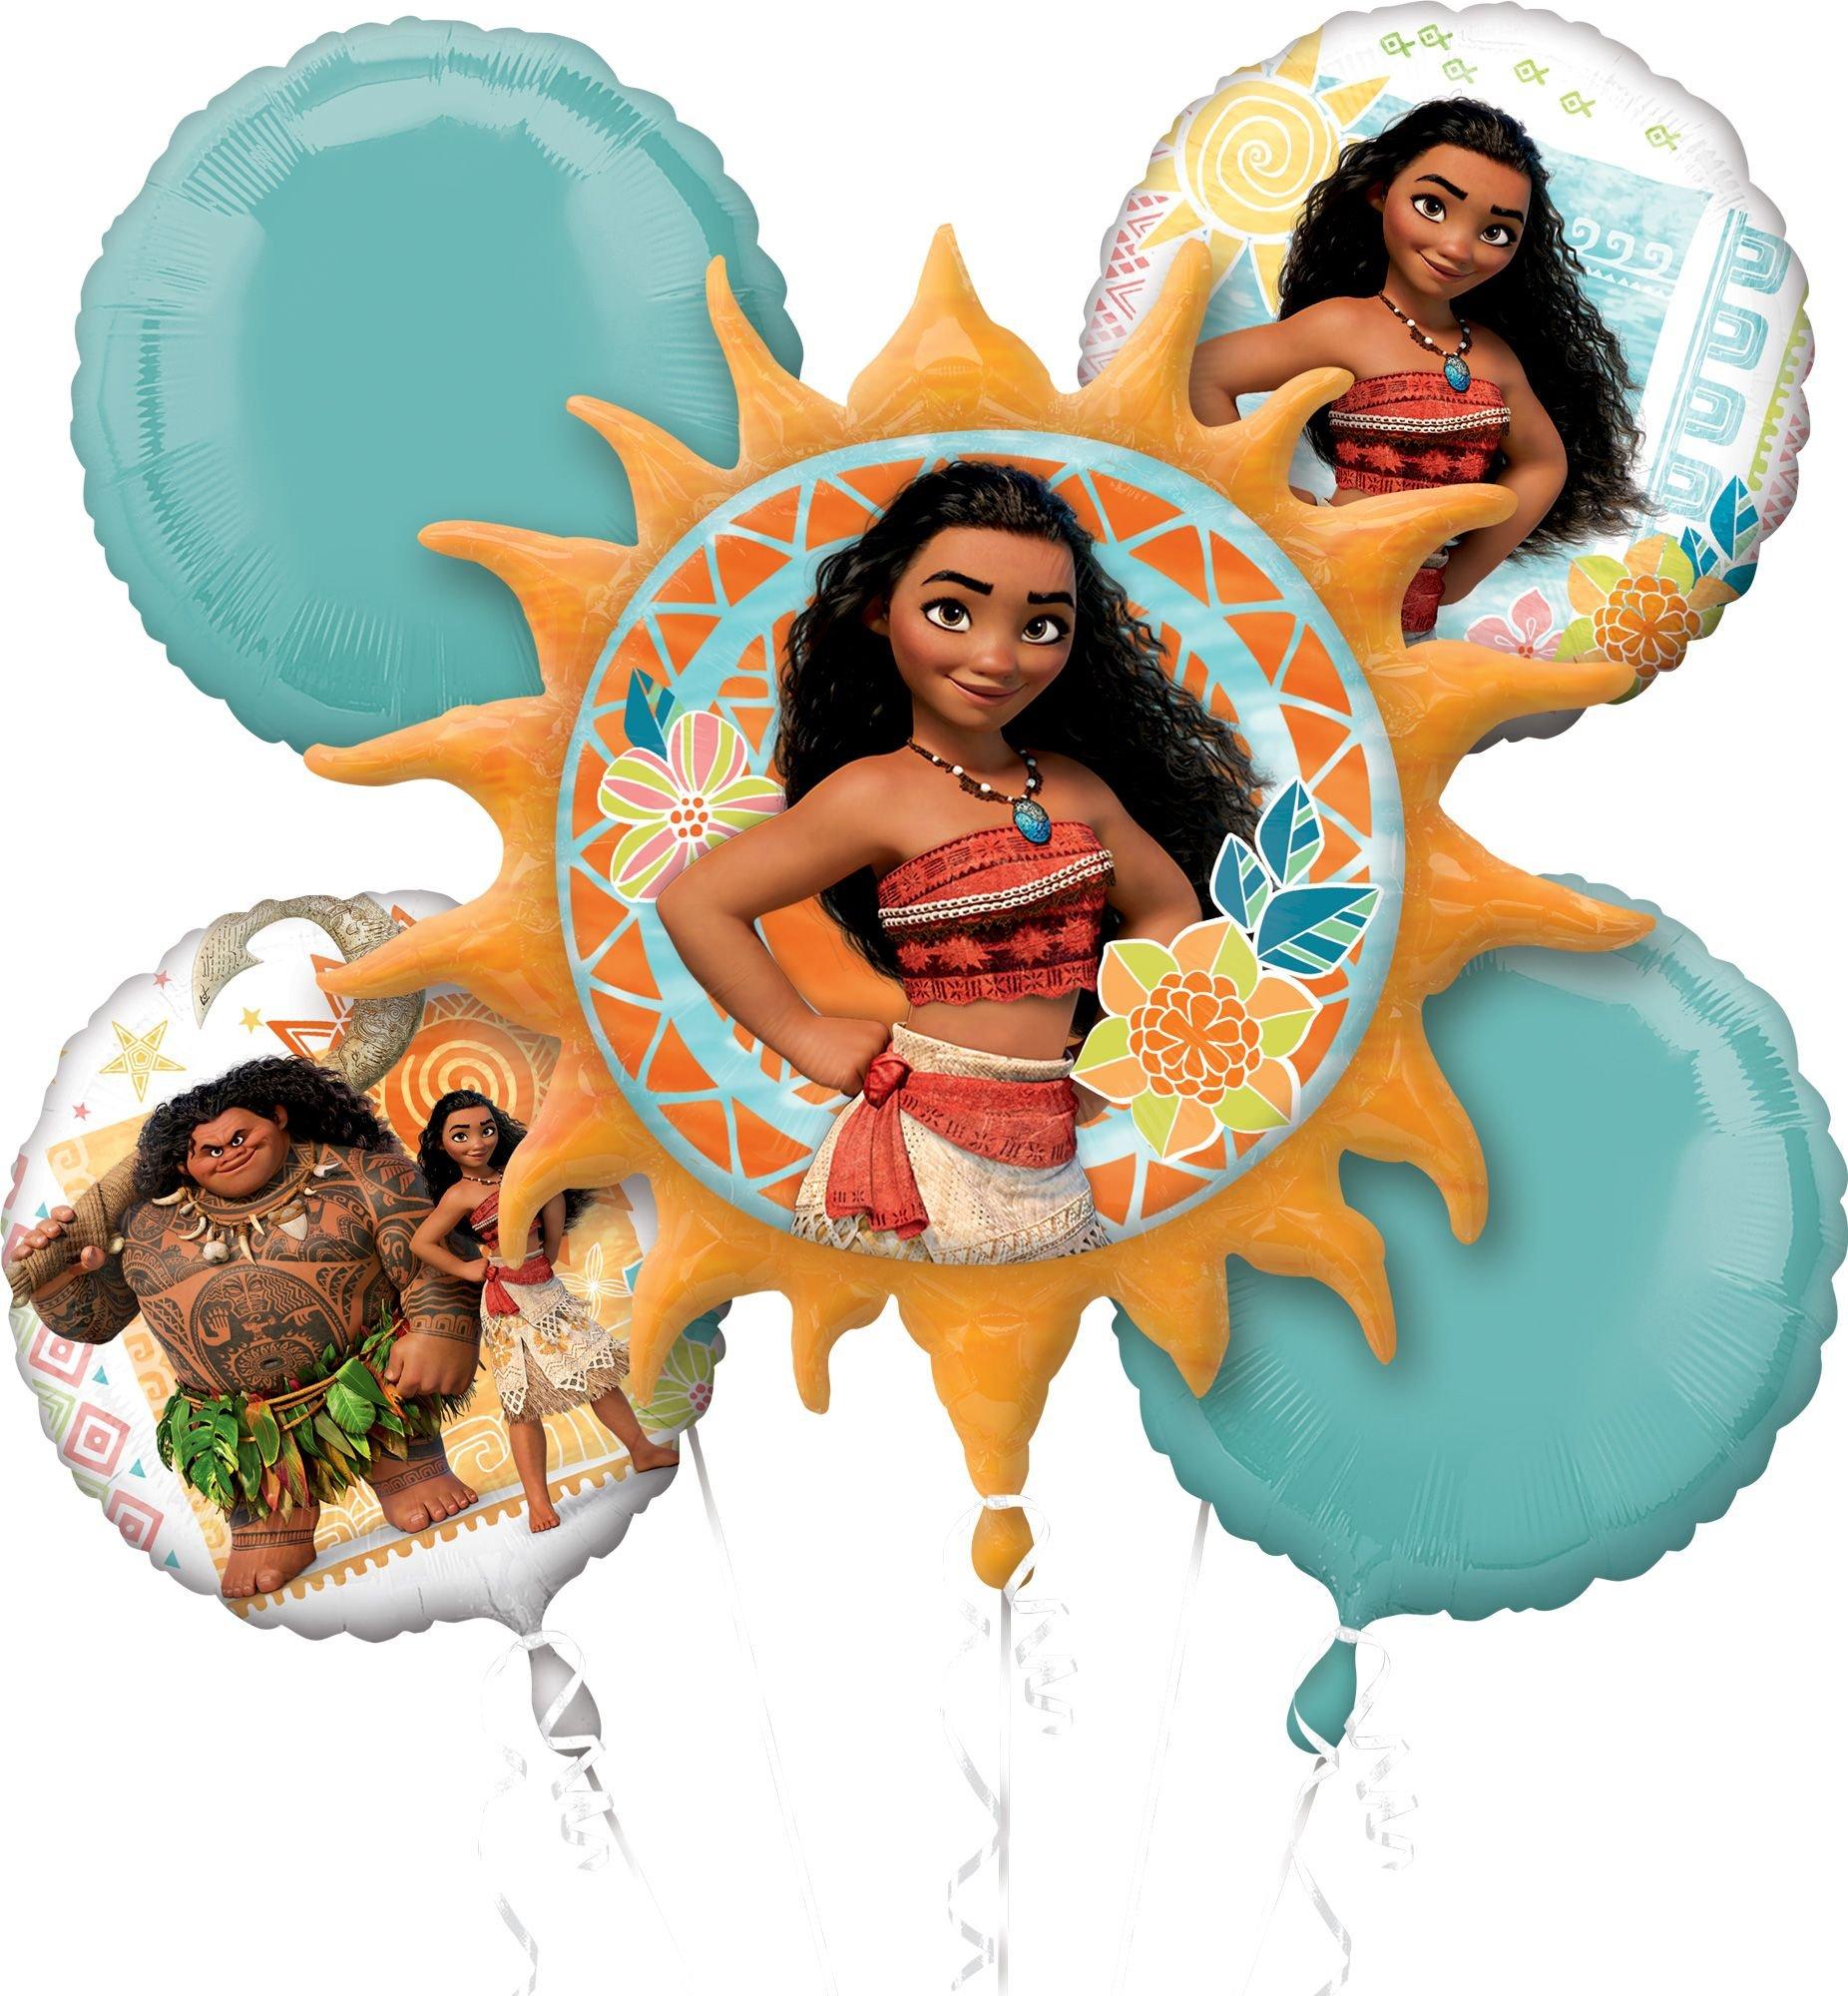 Moana Birthday Party Supplies Baby Moana Children's Party Favors Includes  Cups Plates Napkins for Moana Birthday Baby Shower Decor Blue